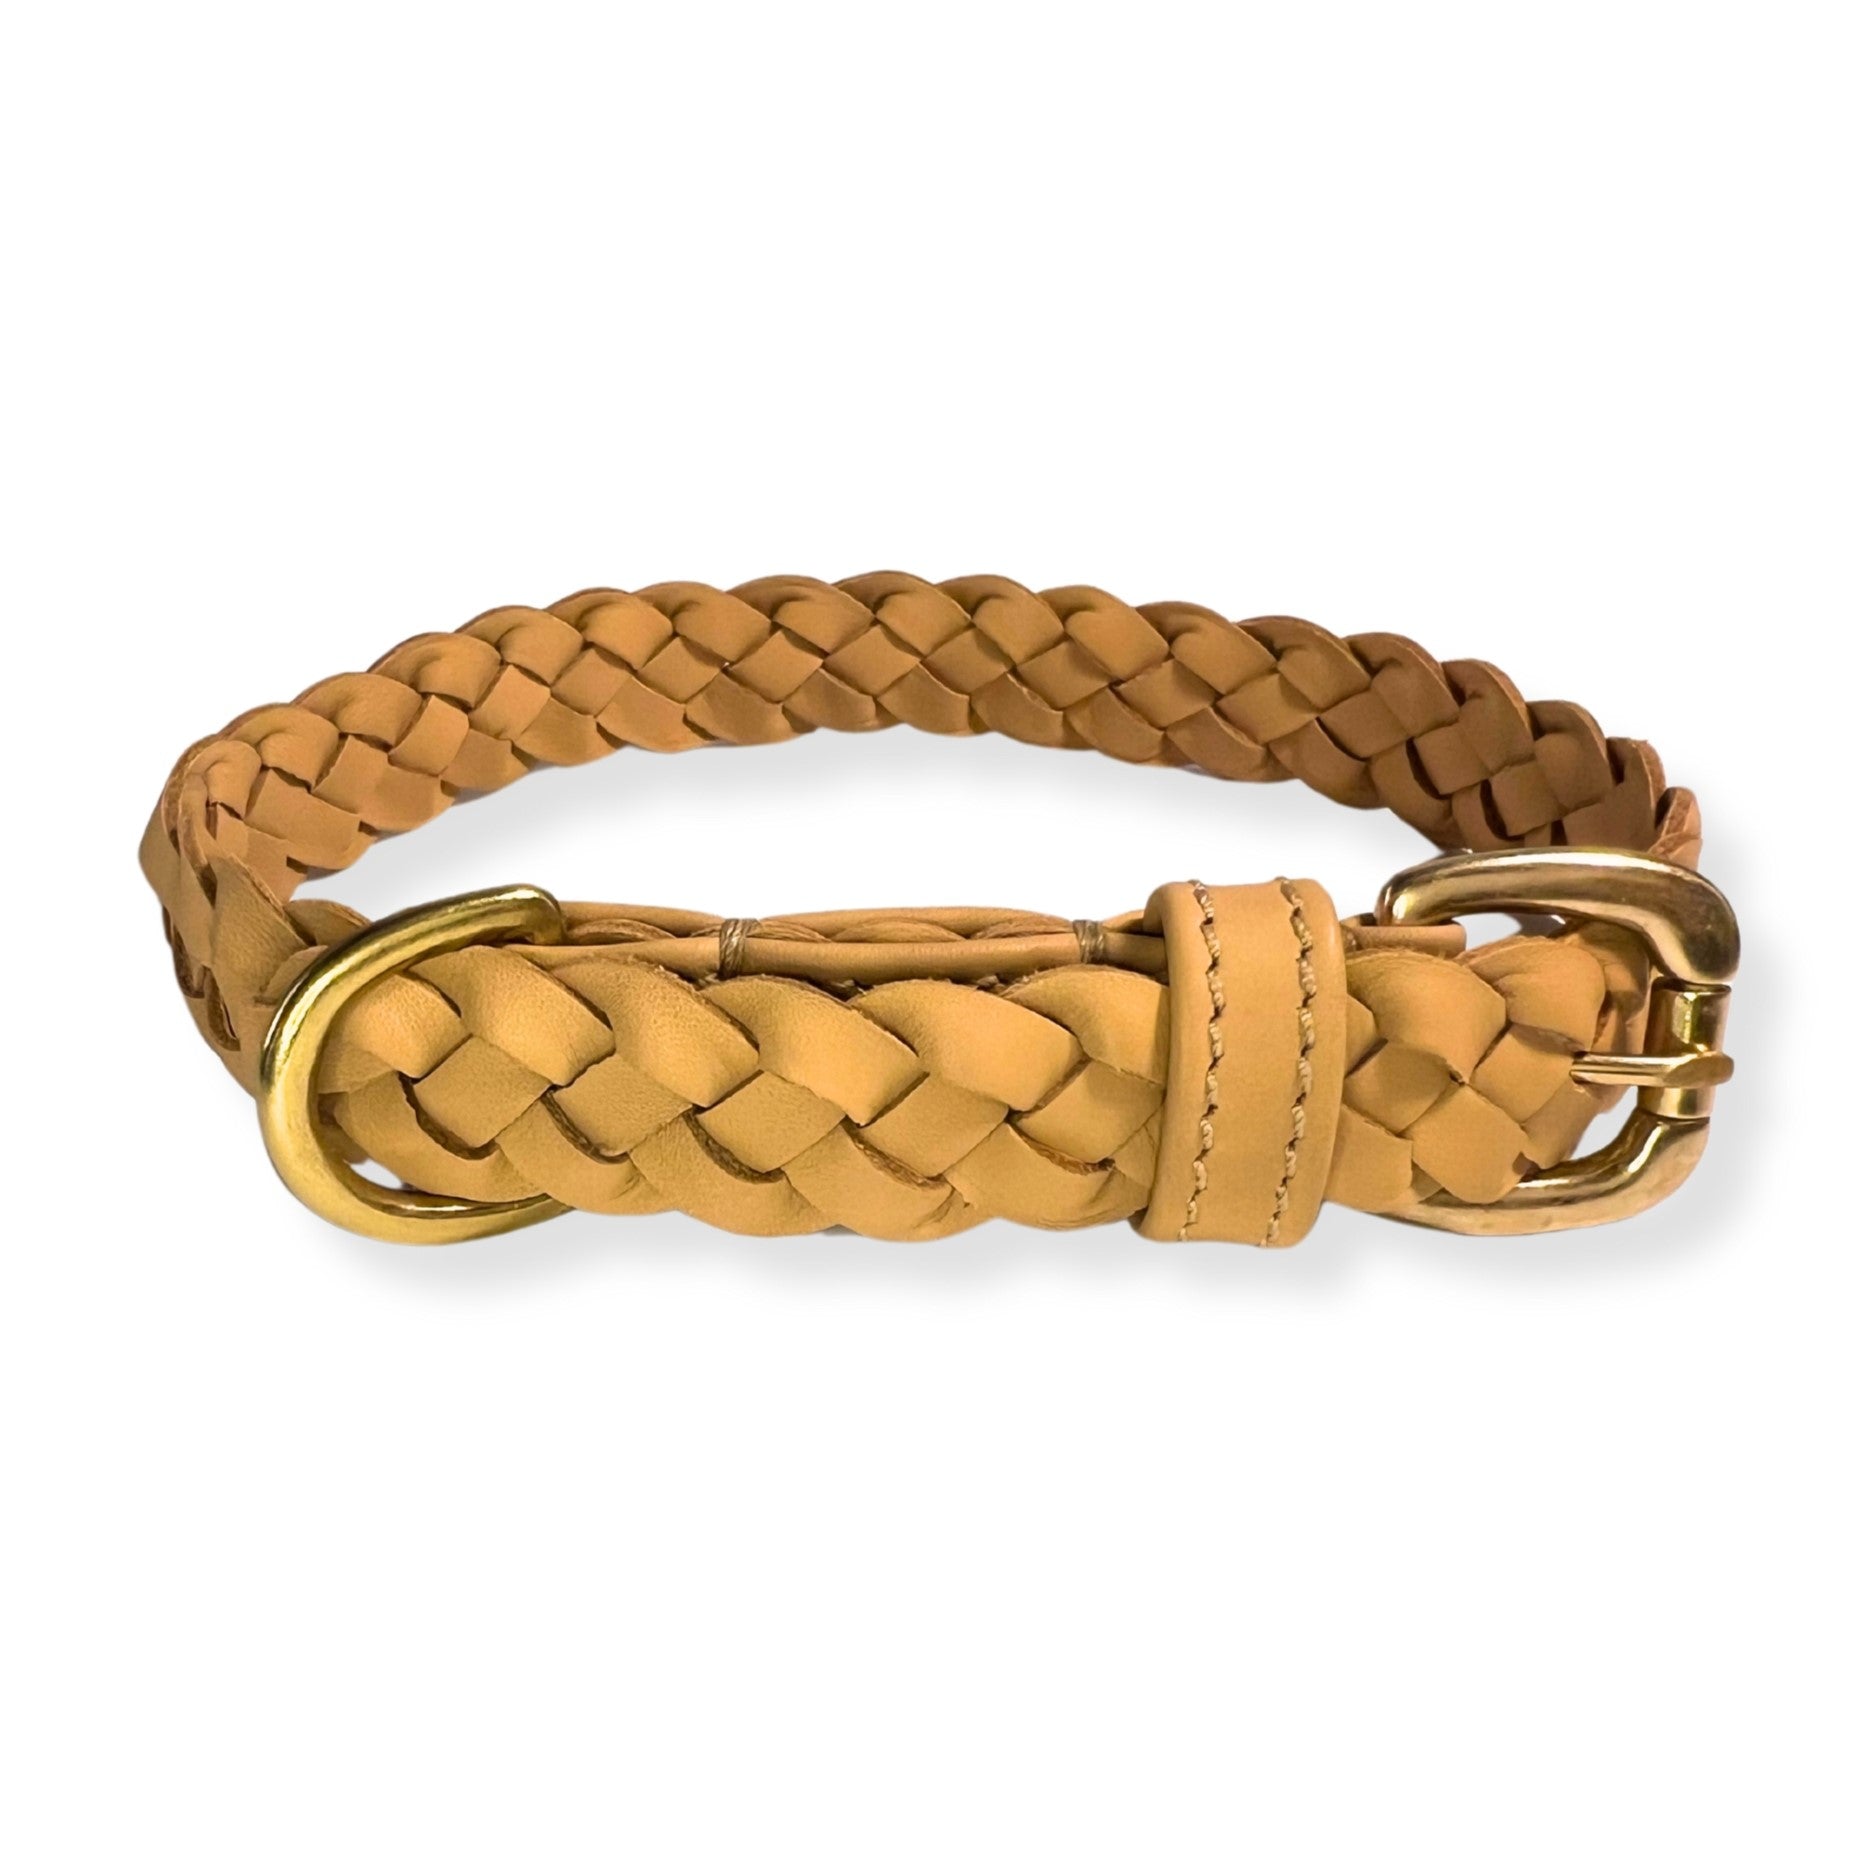 A Windsor - raw leather braided belt with a brass buckle and loop, showcasing Georgie Paws' handmade intricate craftsmanship and a stylish, classic design suitable for a variety of outfits.